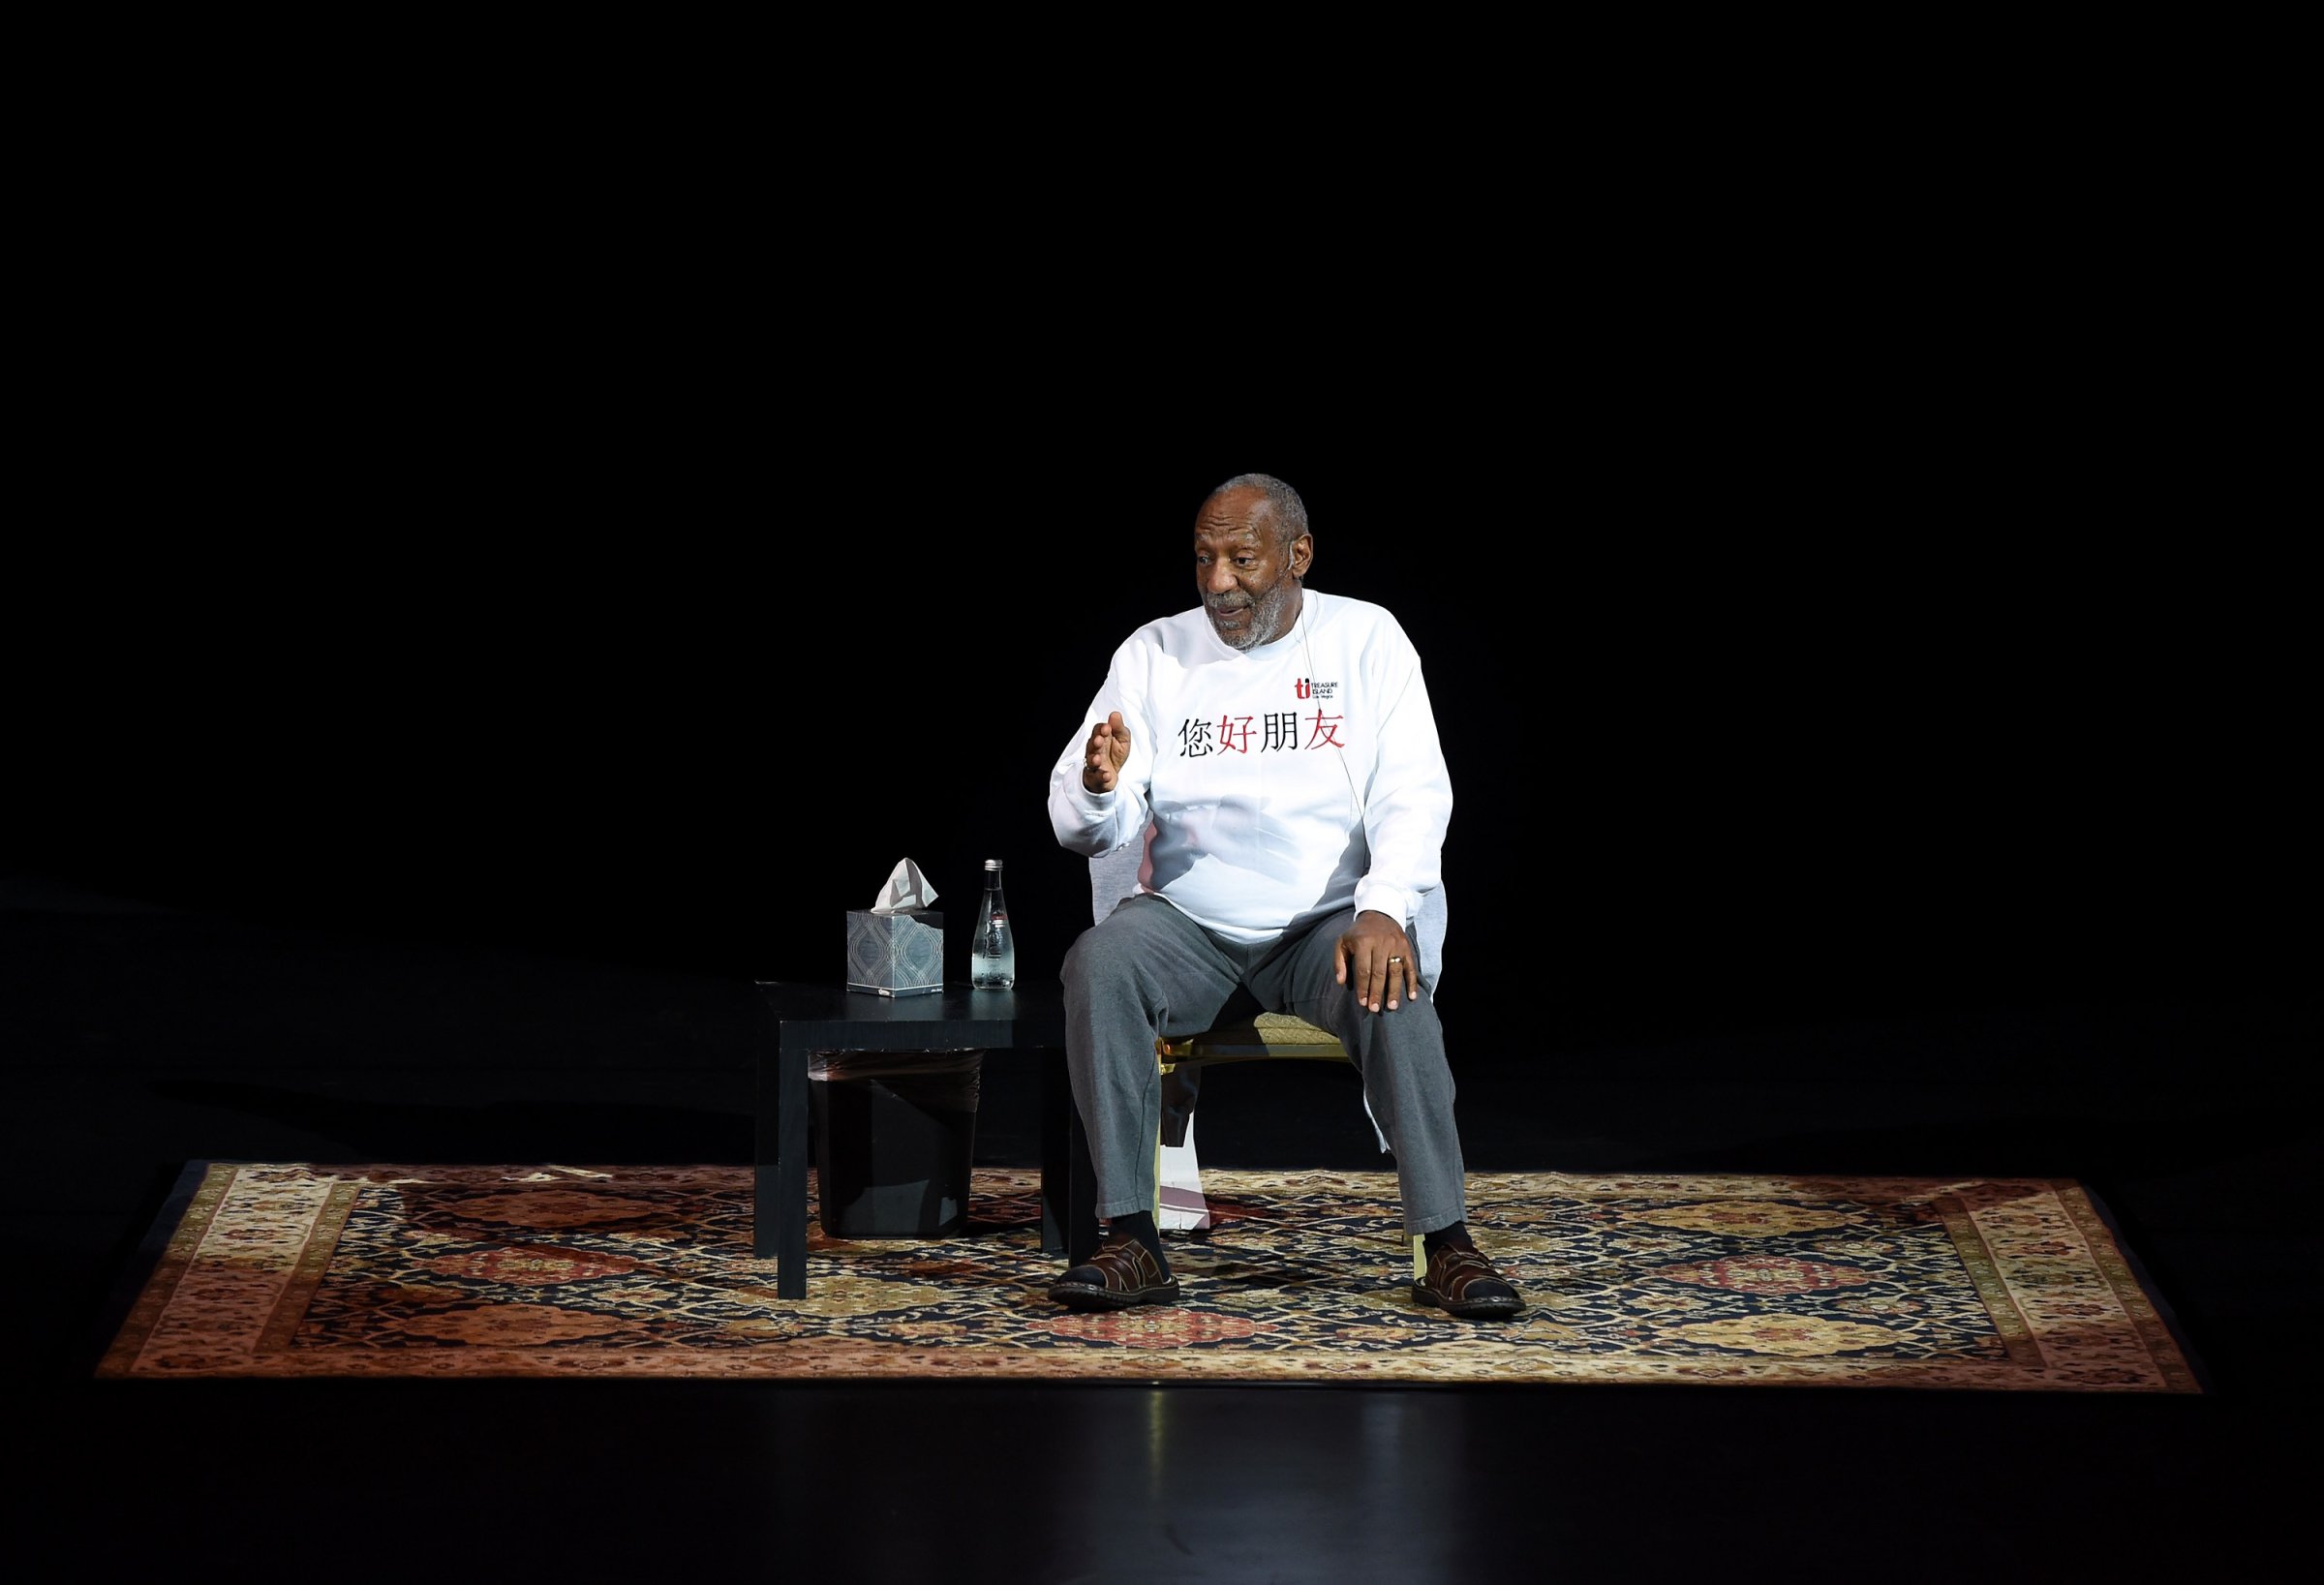 Comedian/actor Bill Cosby performs at the Treasure Island Hotel & Casino on Sept. 26, 2014 in Las Vegas, Nevada.